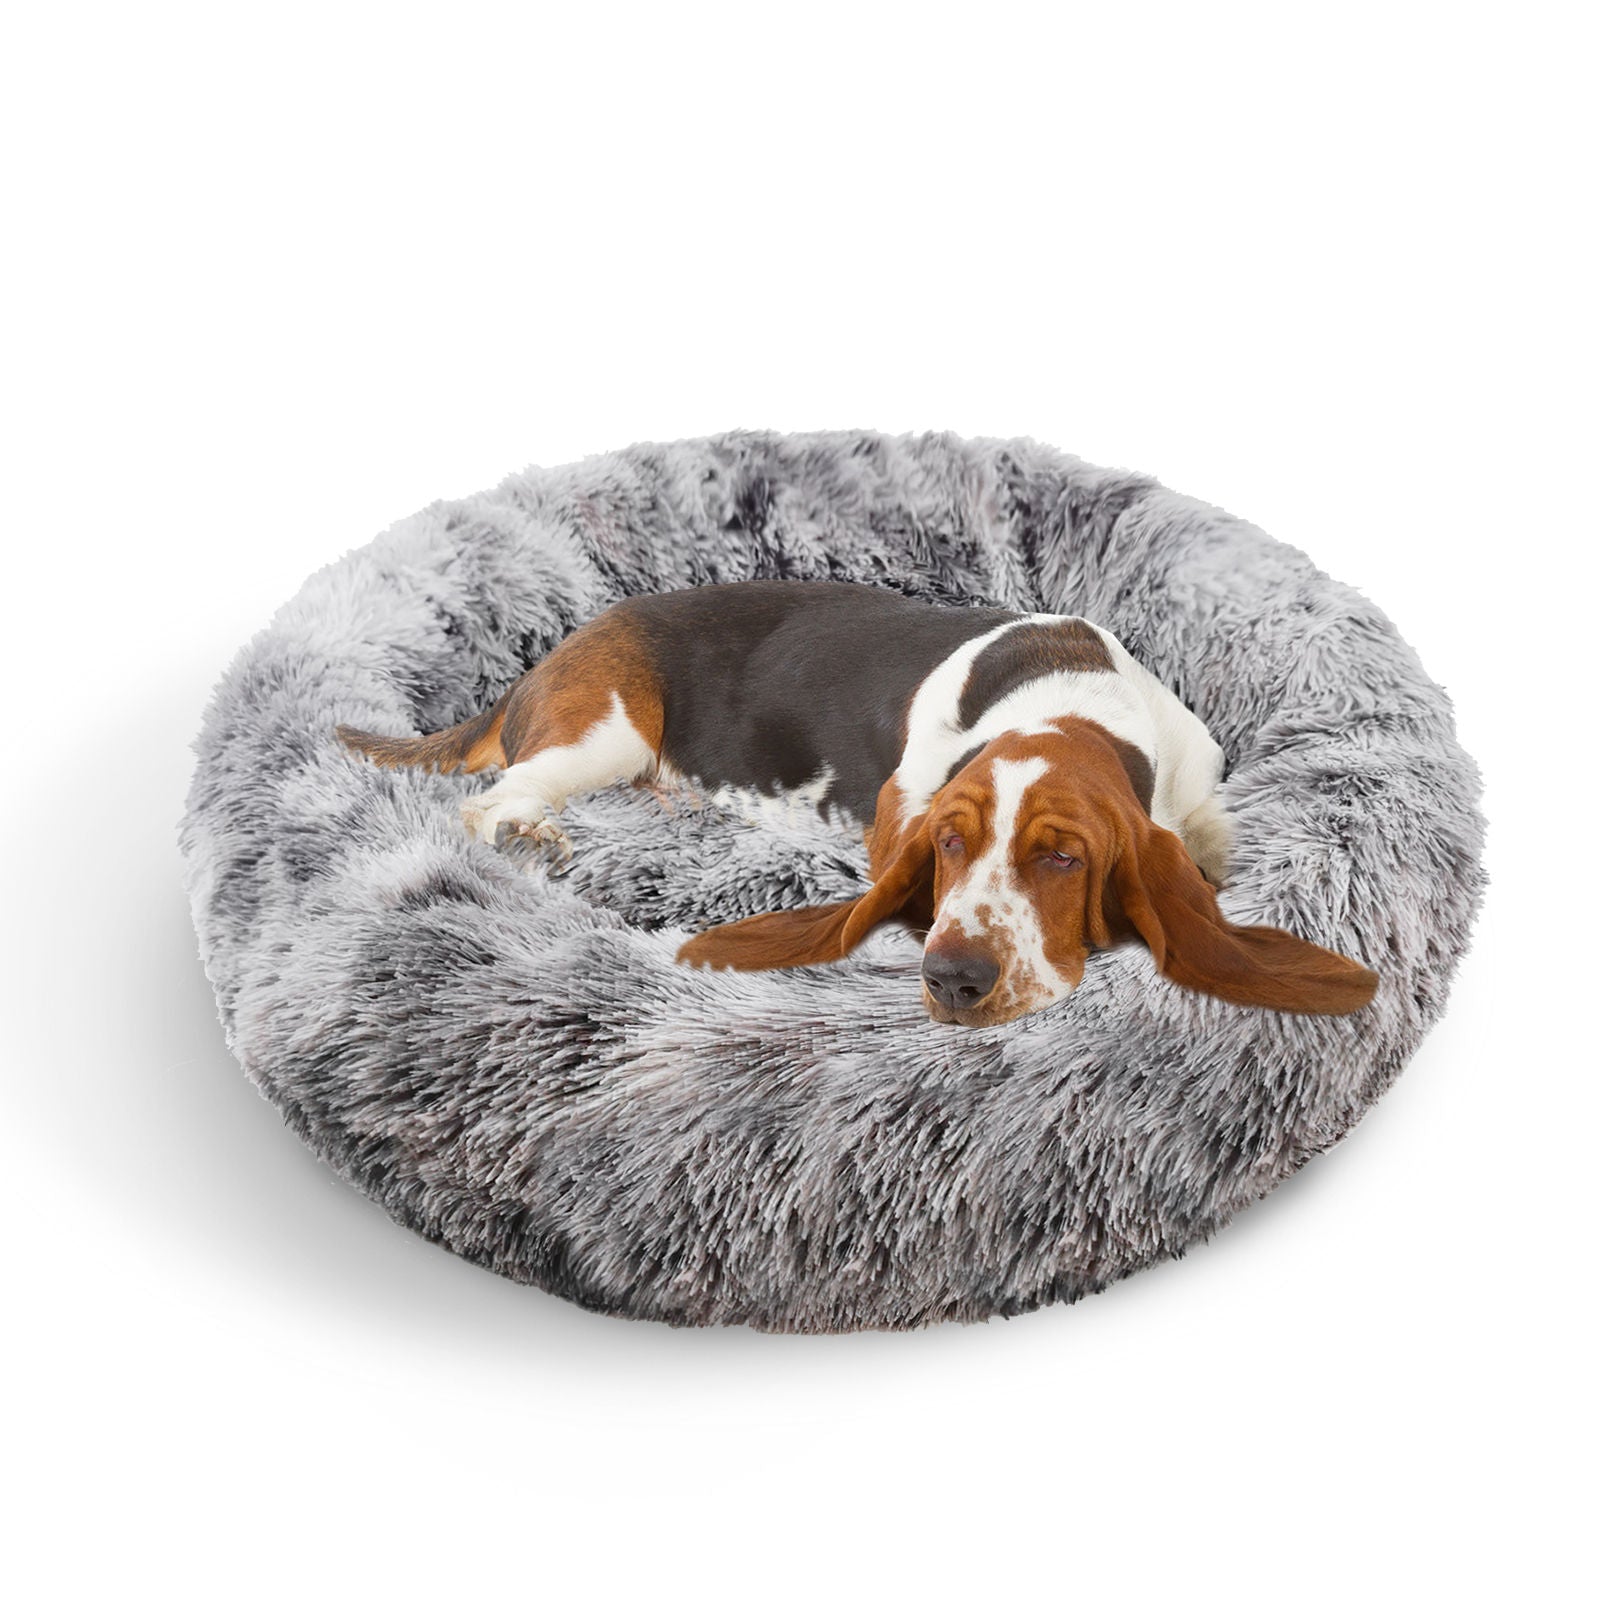 Pawfriends Pet Dog Cat Calming Bed Warm Soft Plush Sleeping Kennel Removable Washable 120cm